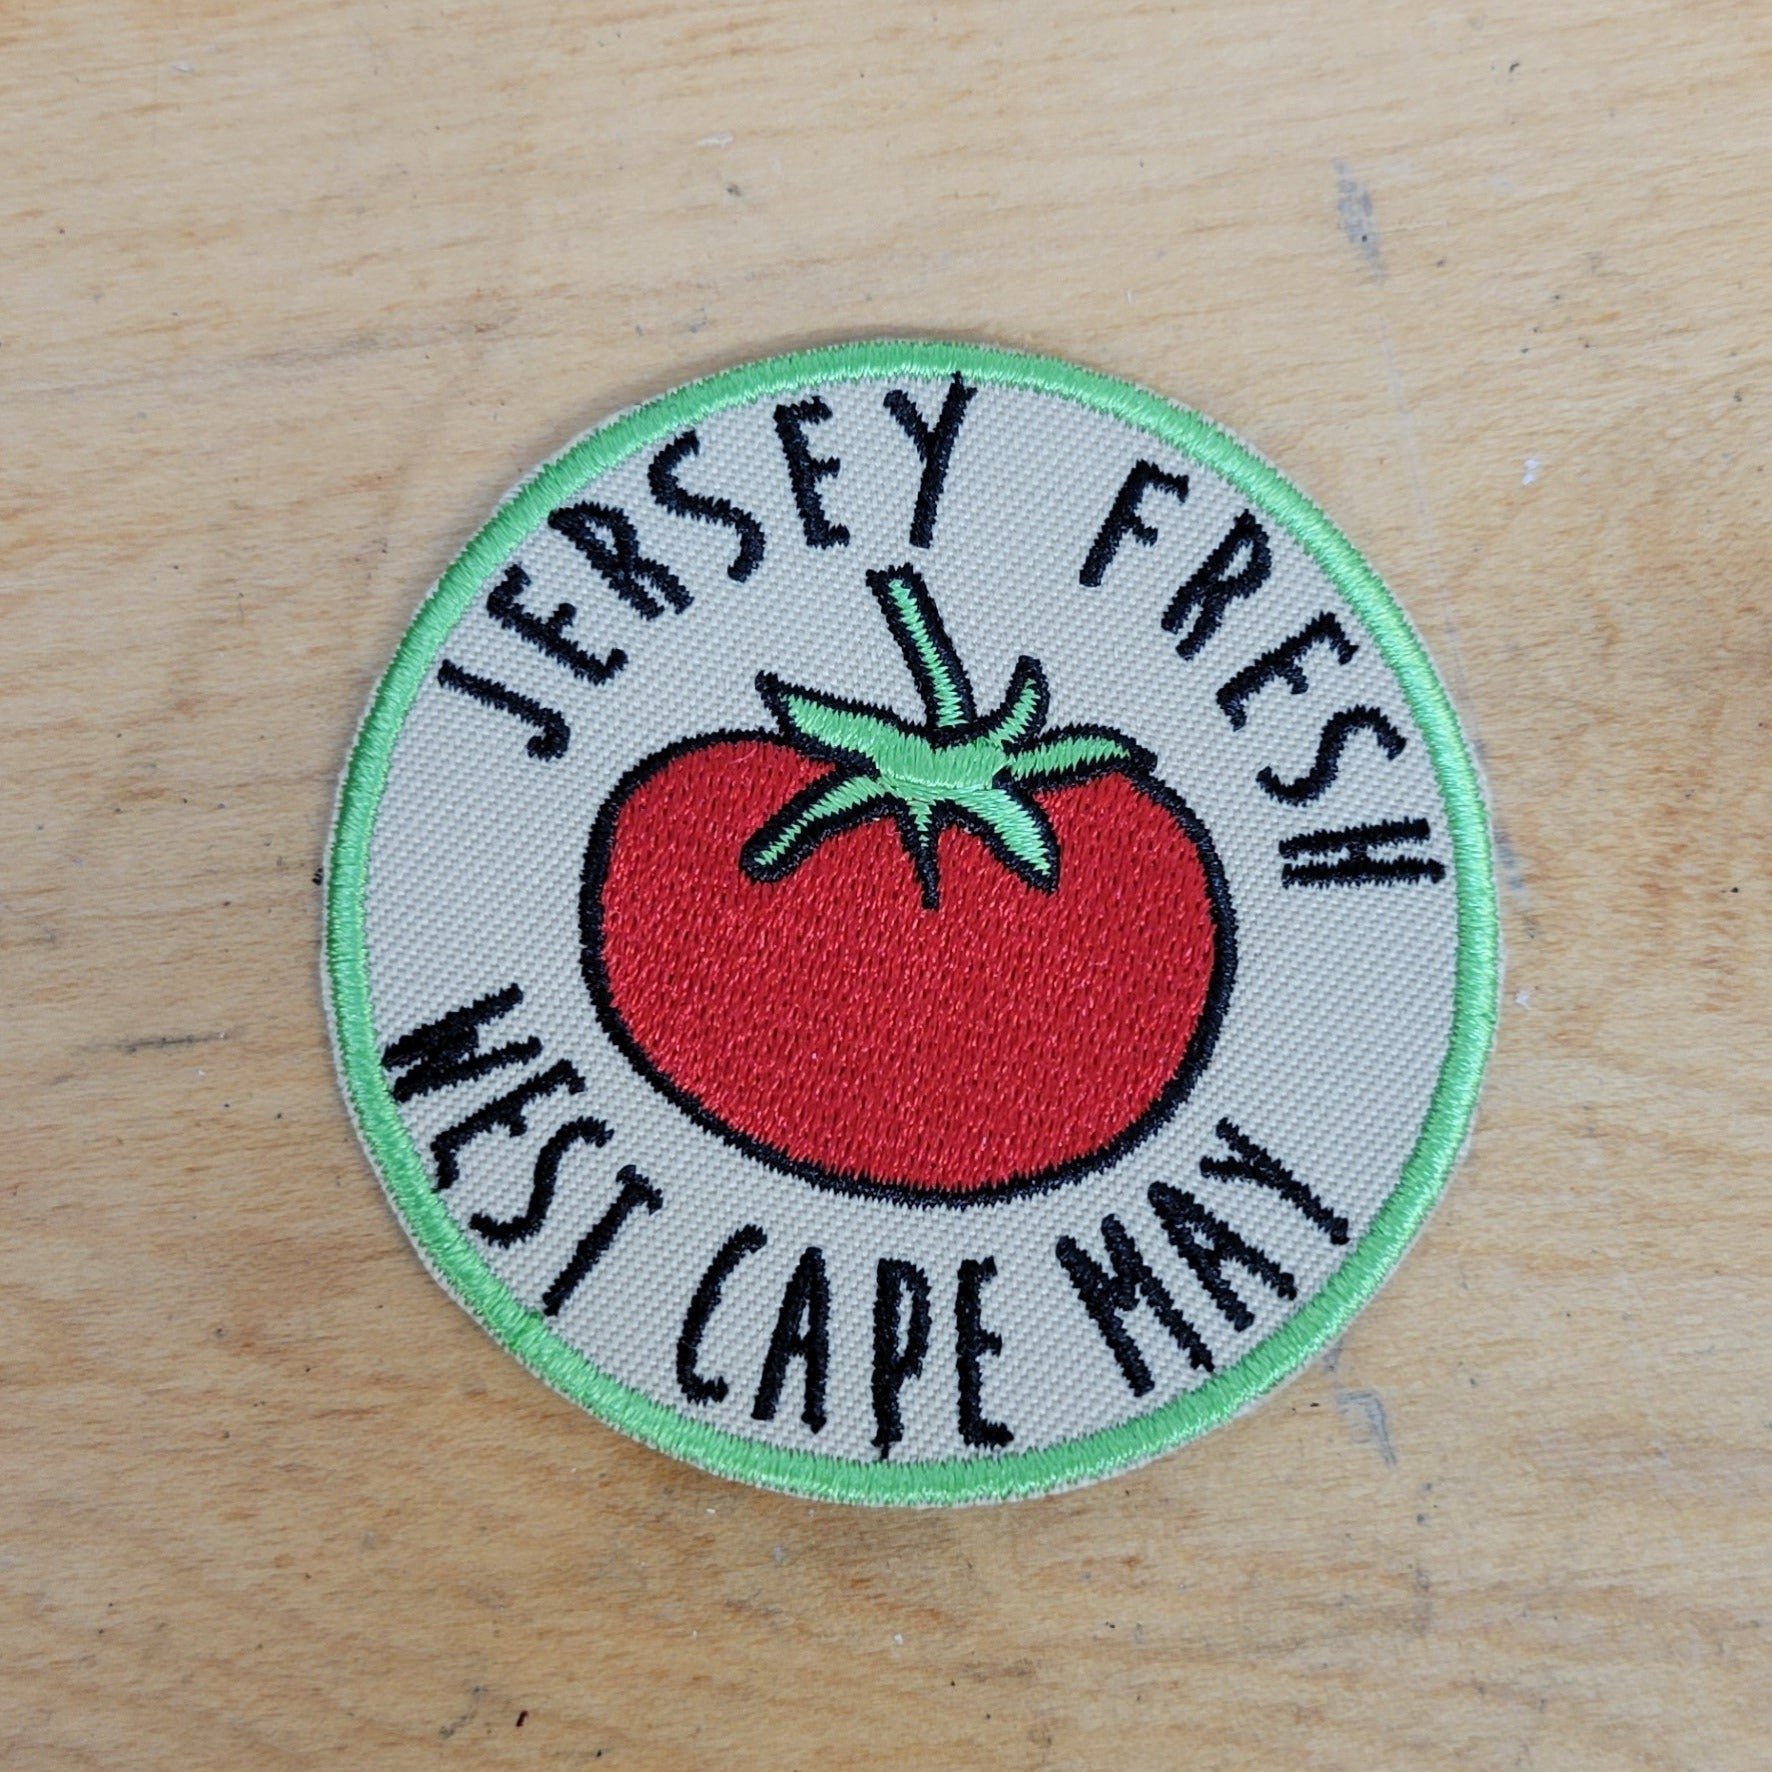 Green-rimmed, white patch that features a bright red tomato. Includes 'Jersey Fresh, West Cape May' on the front.